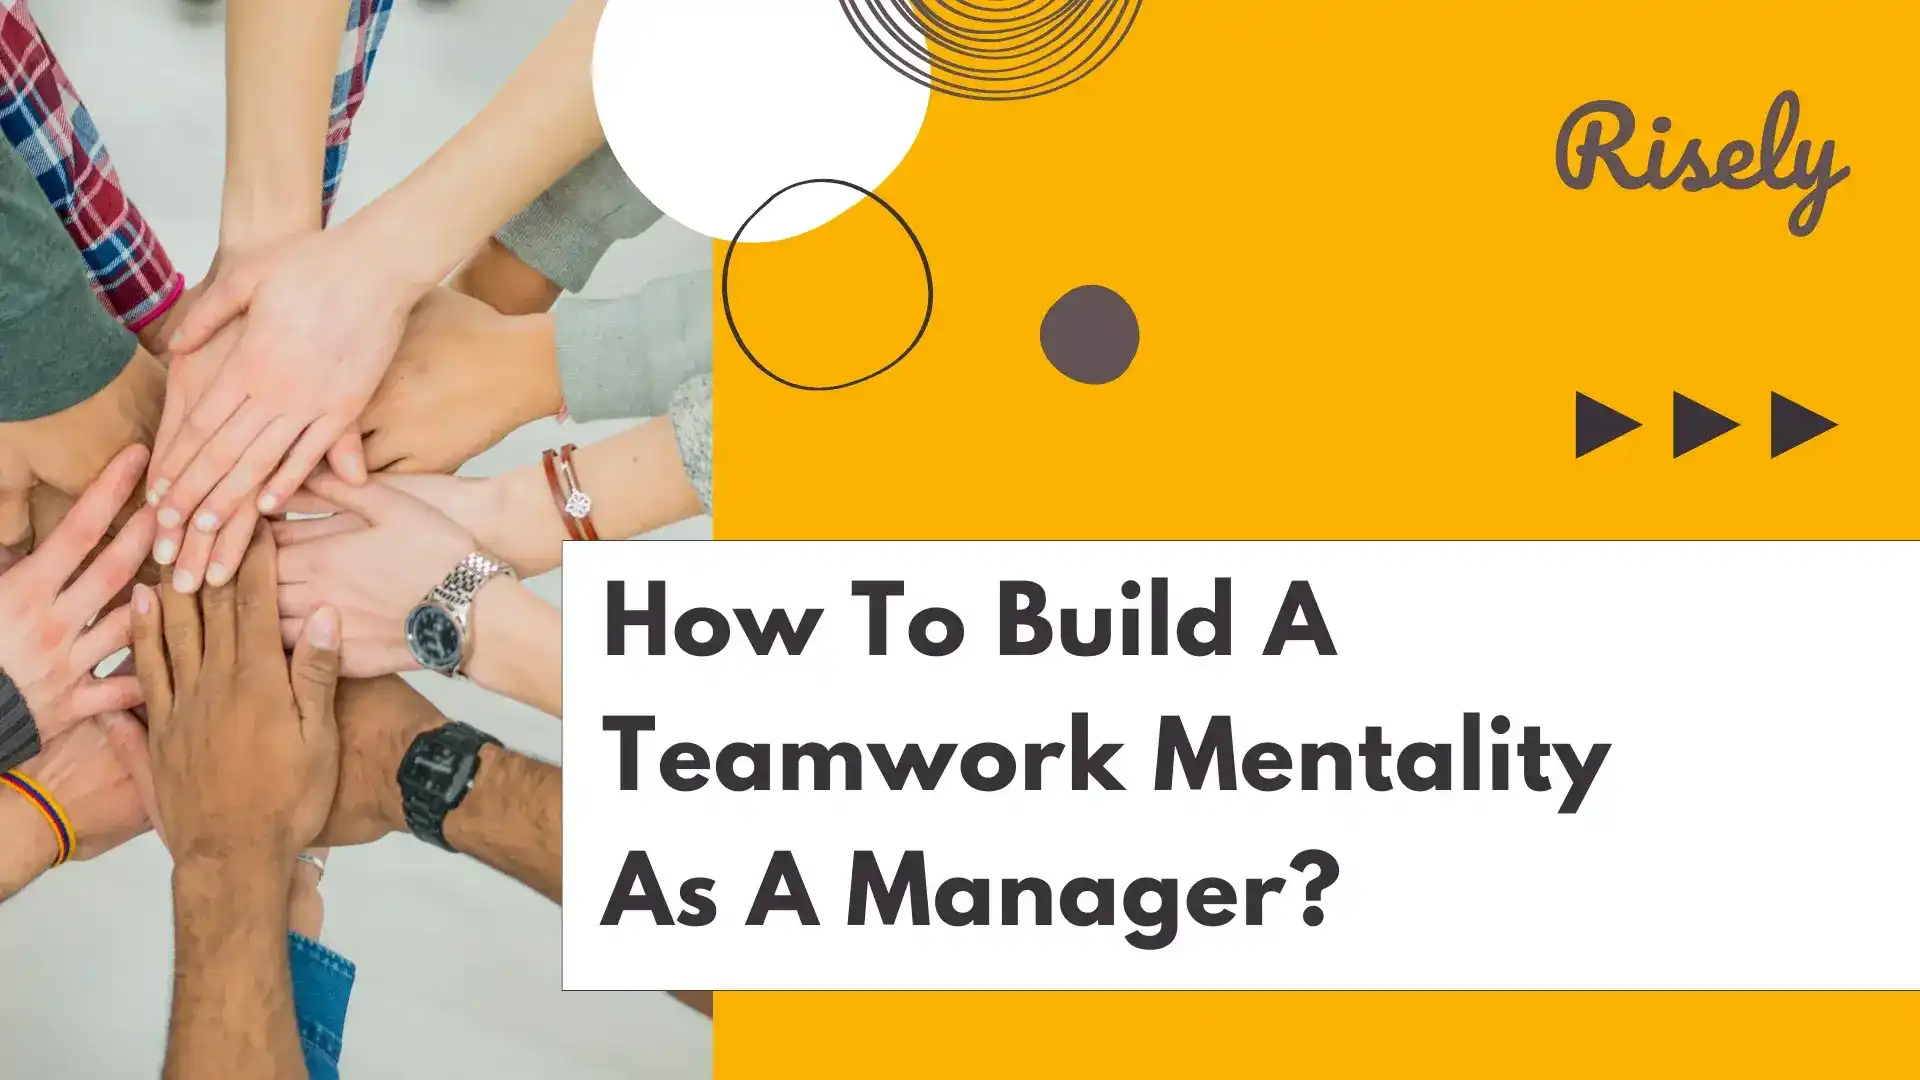 How To Build A Teamwork Mentality As A Manager?